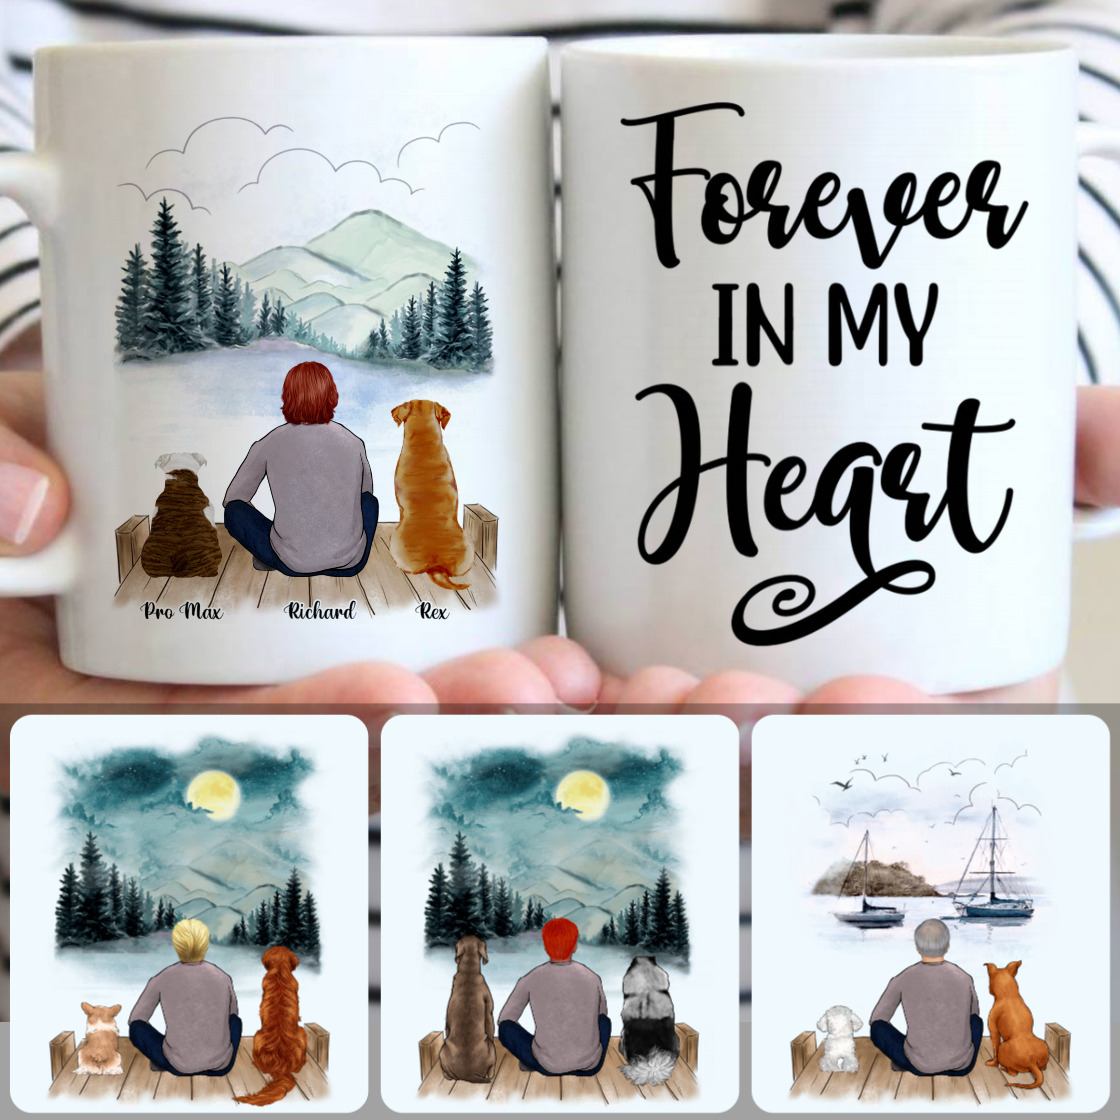 Personalized Mug, Perfect Gifts For Him Husband Boyfriend, Man & 2 Dogs Customized Coffee Mug With Names